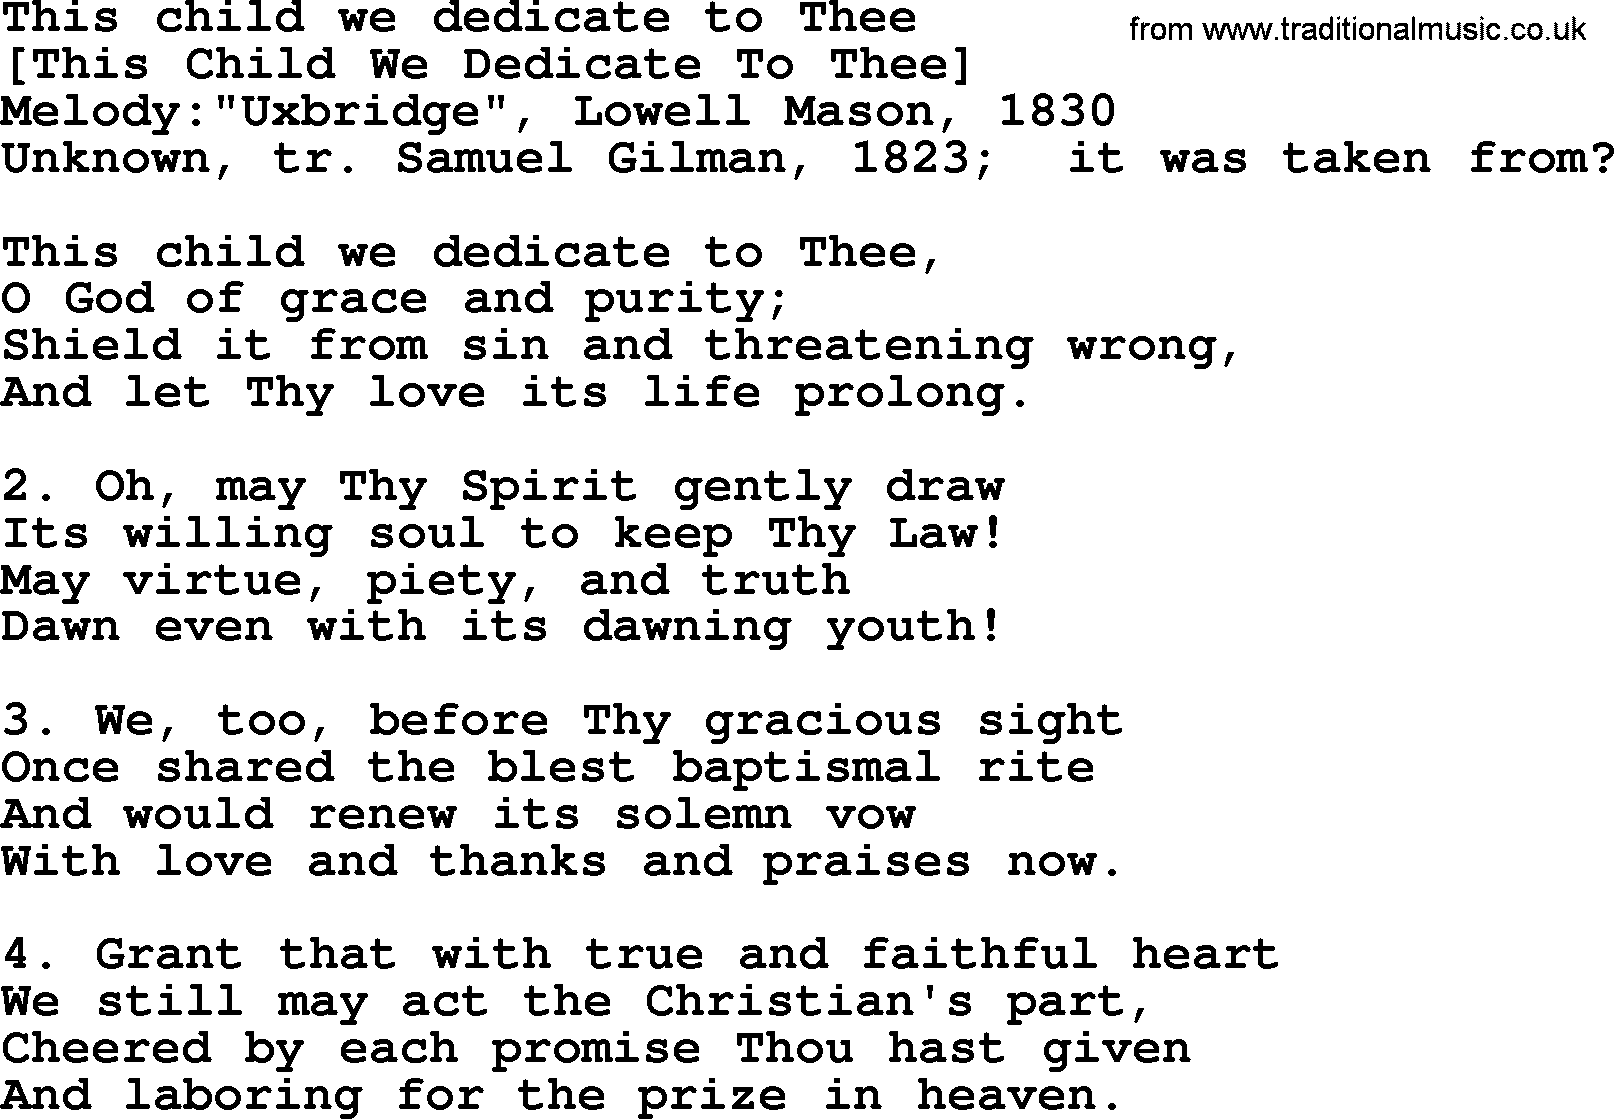 Old American Song: This Child We Dedicate To Thee, lyrics